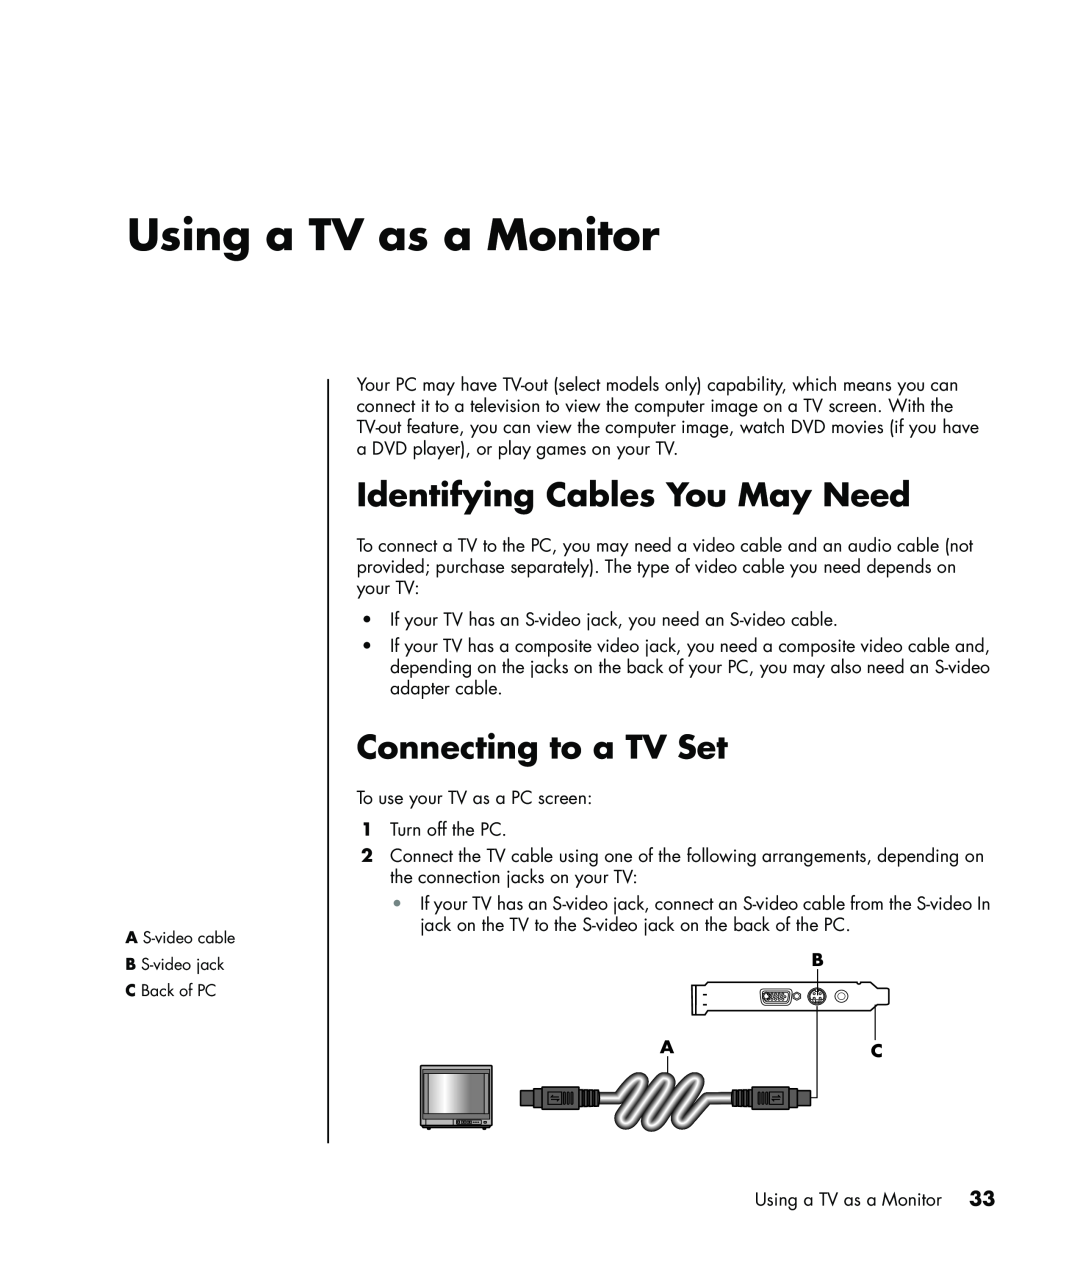 HP a1250n, a1265w, a1260a, a1257c, a1245c Using a TV as a Monitor, Identifying Cables You May Need, Connecting to a TV Set 